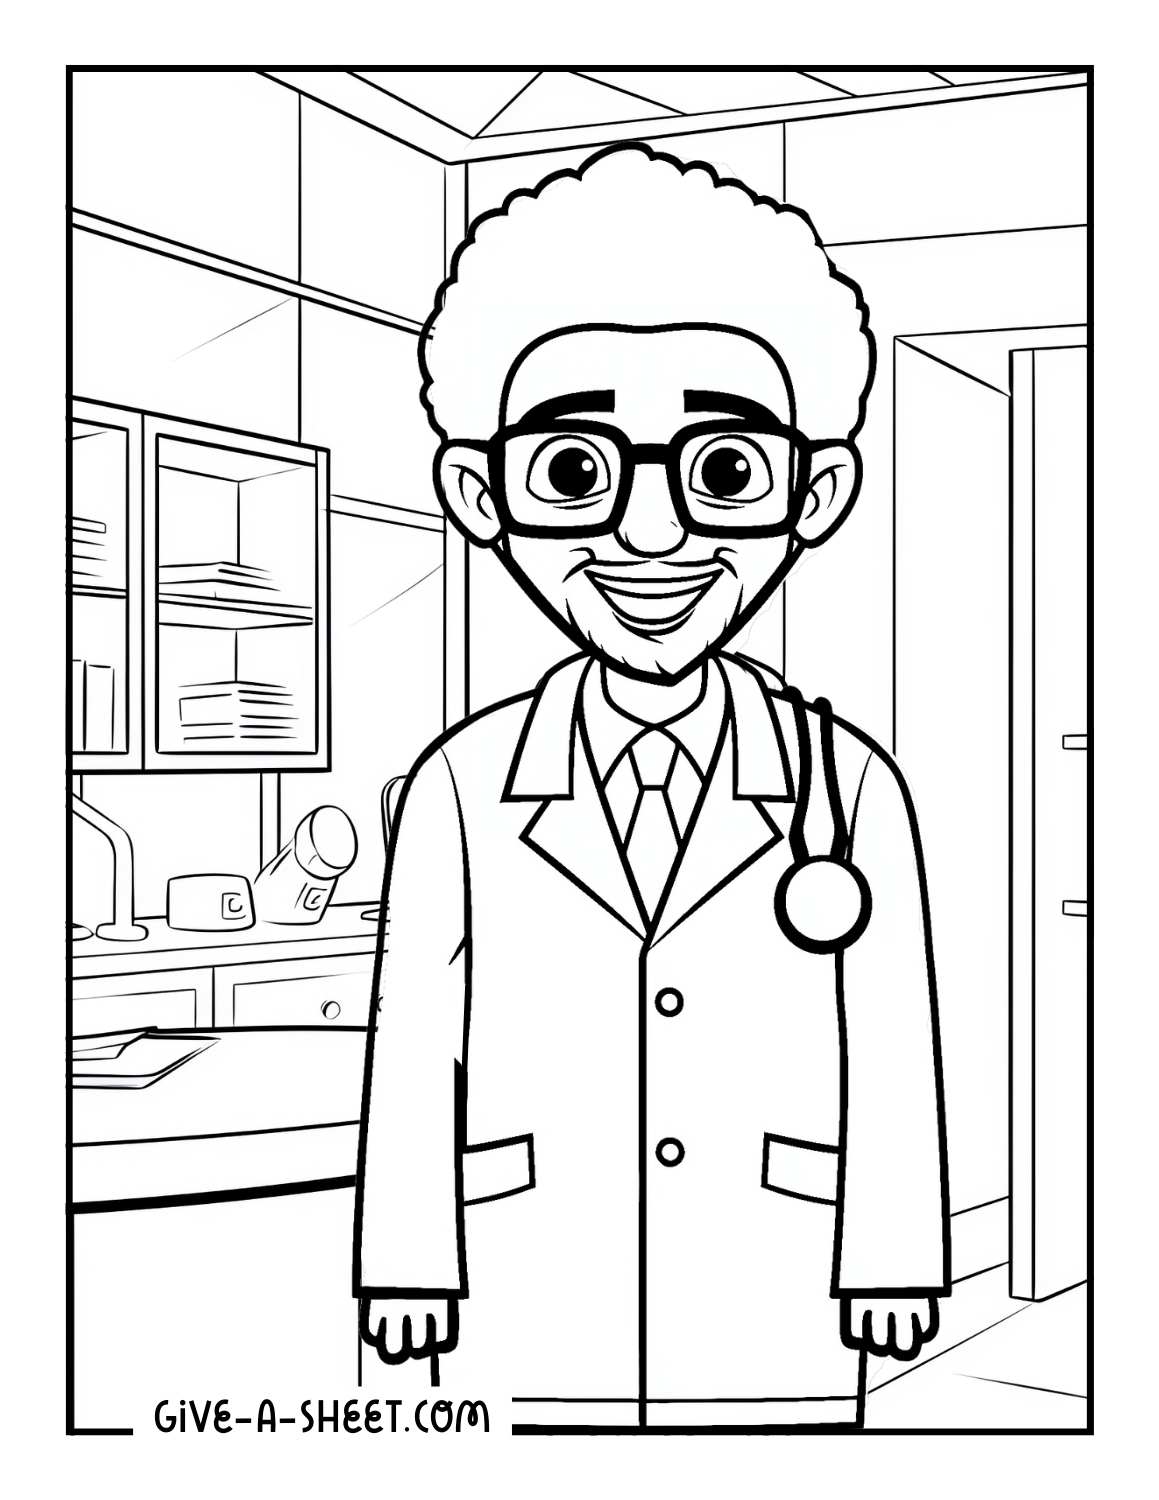 African American doctor in a hospital coloring page.